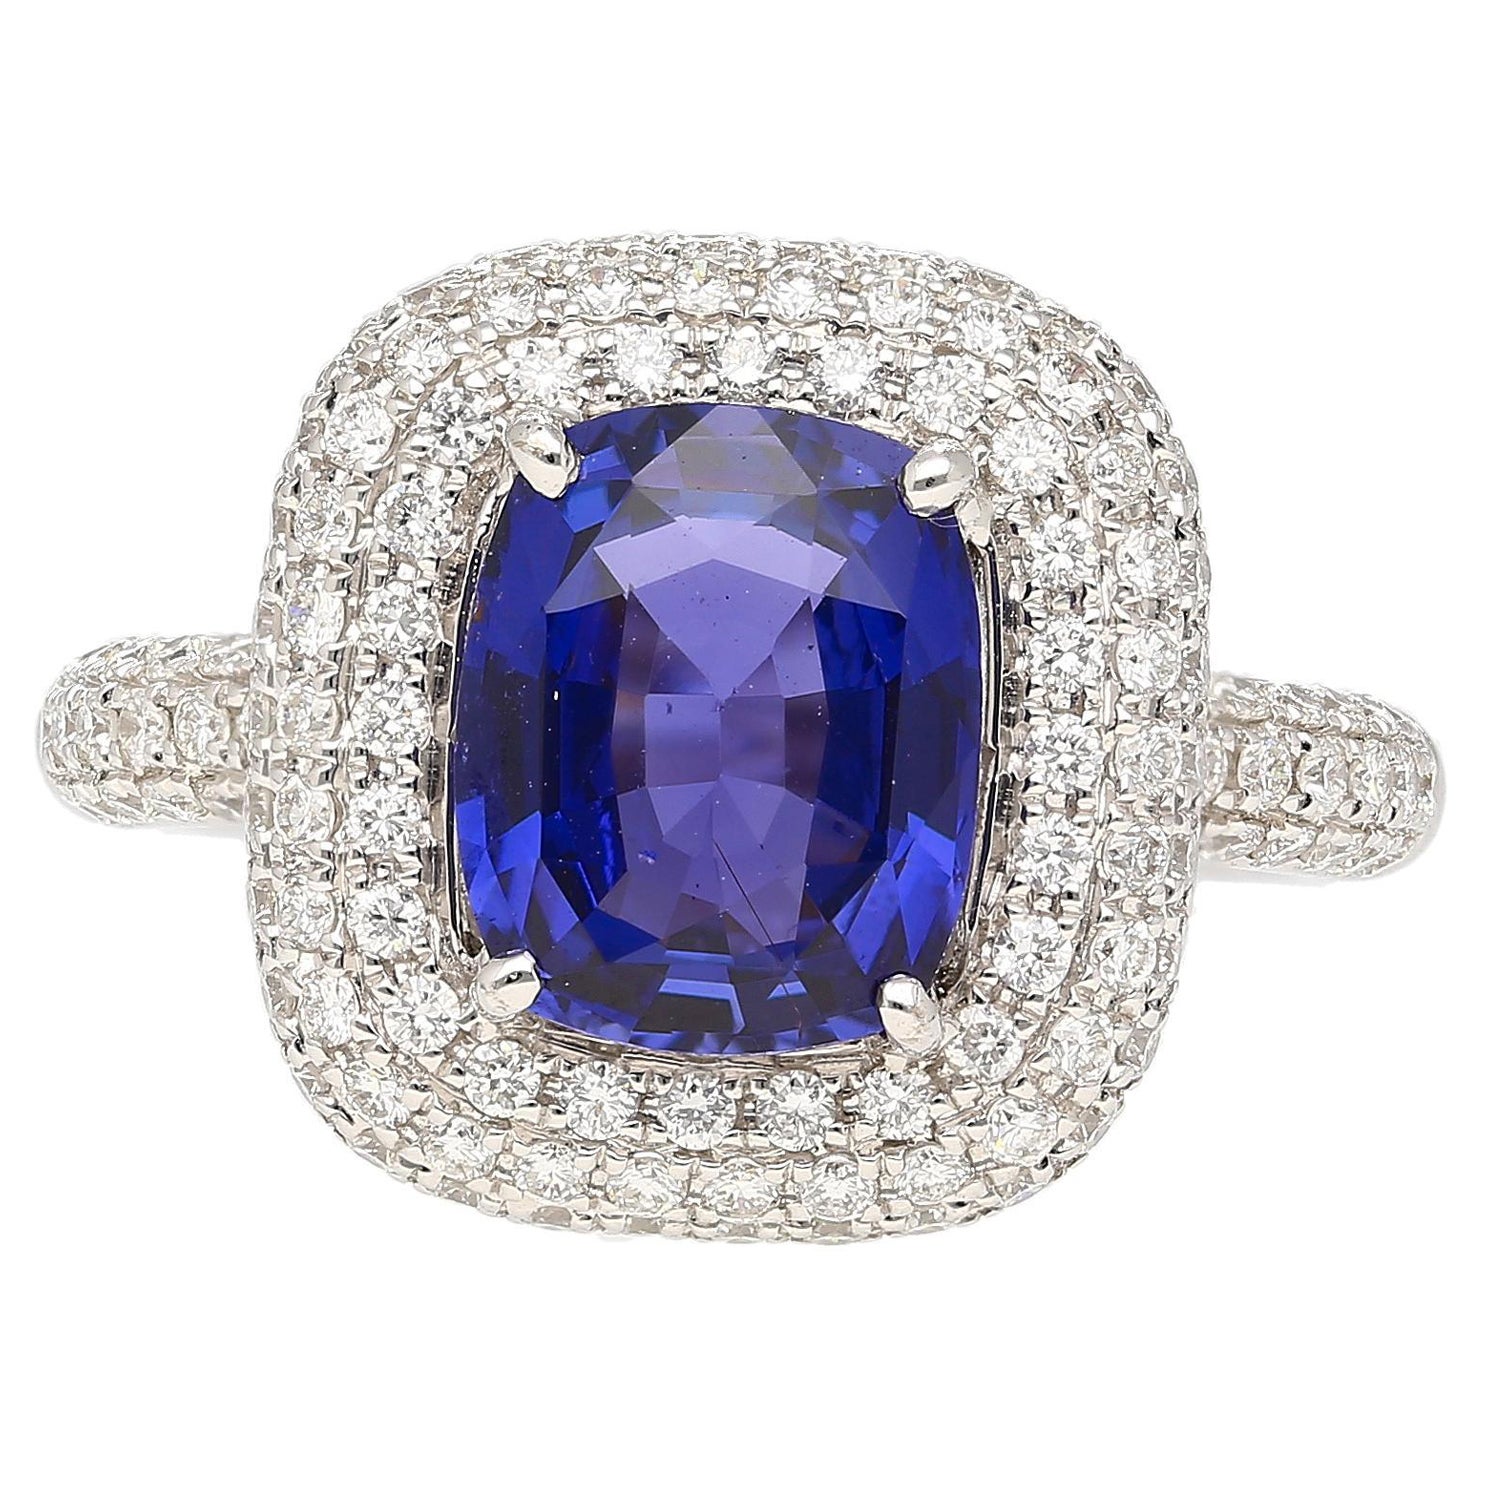 GIA Certified No Heat Color Change 3.25 Carat Violet-Blue Sapphire Ring For Sale